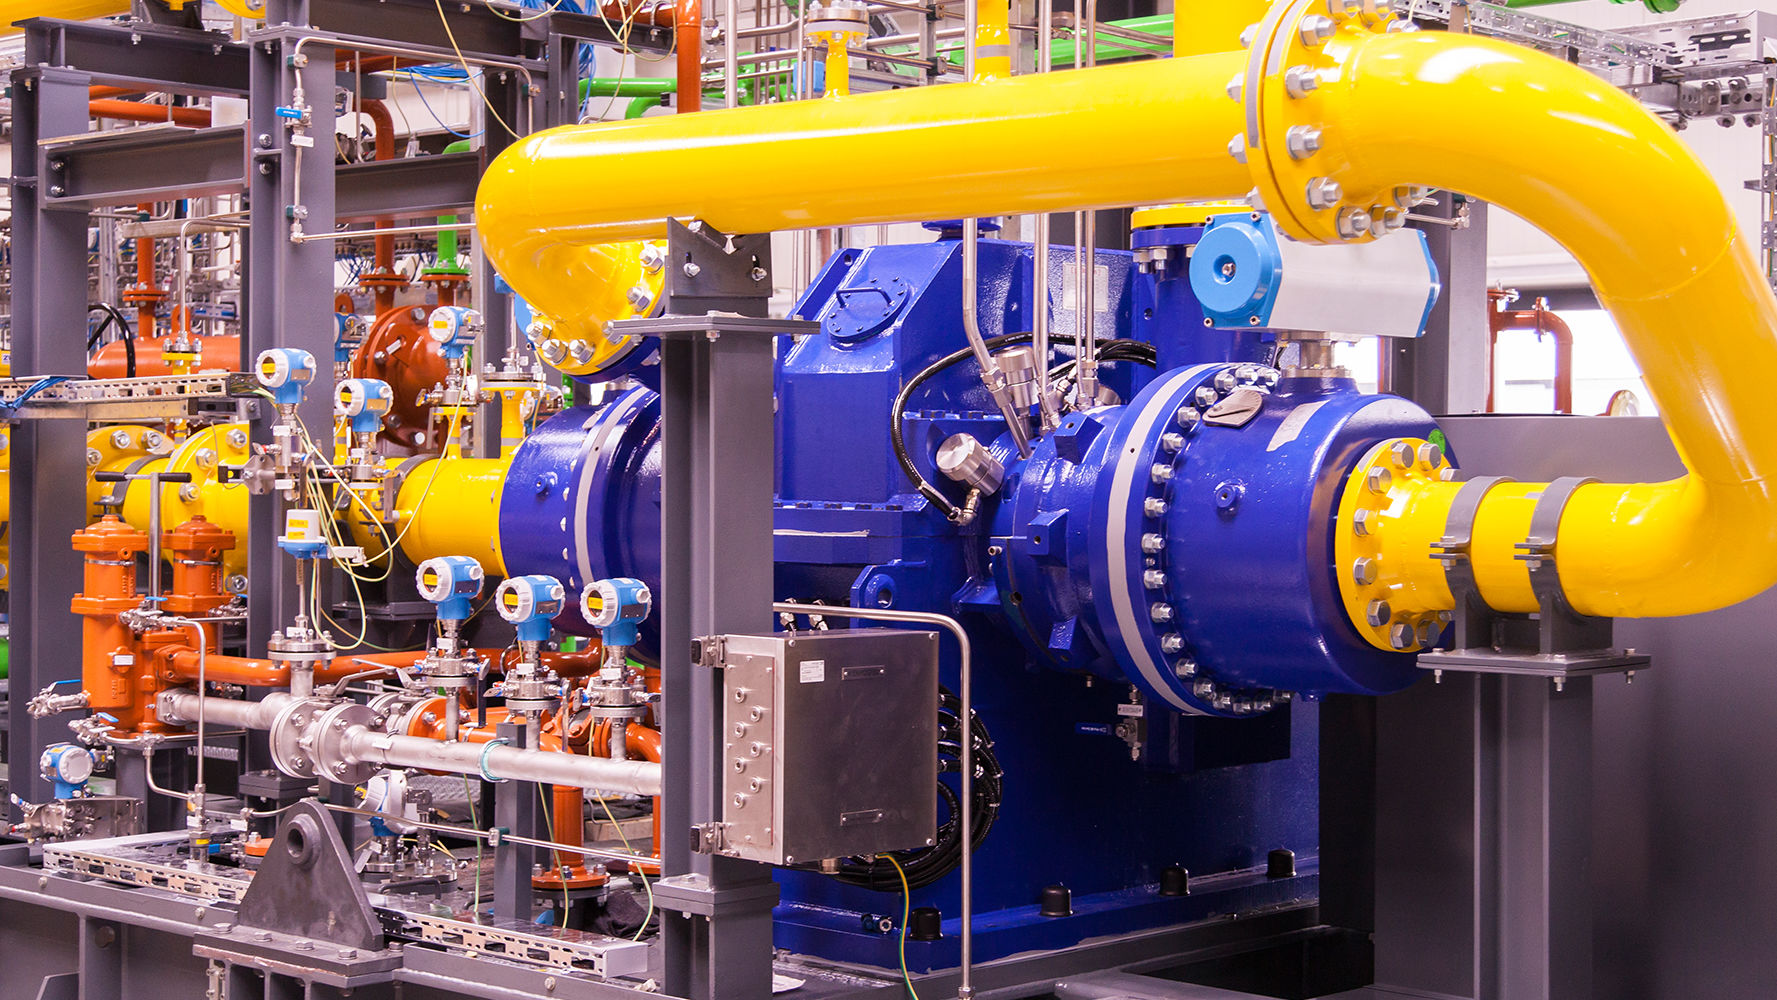 A blue 2-stage integrally geared centrifugal compressor with yellow process gas lines and measuring equipment is shown, installed on a skid.